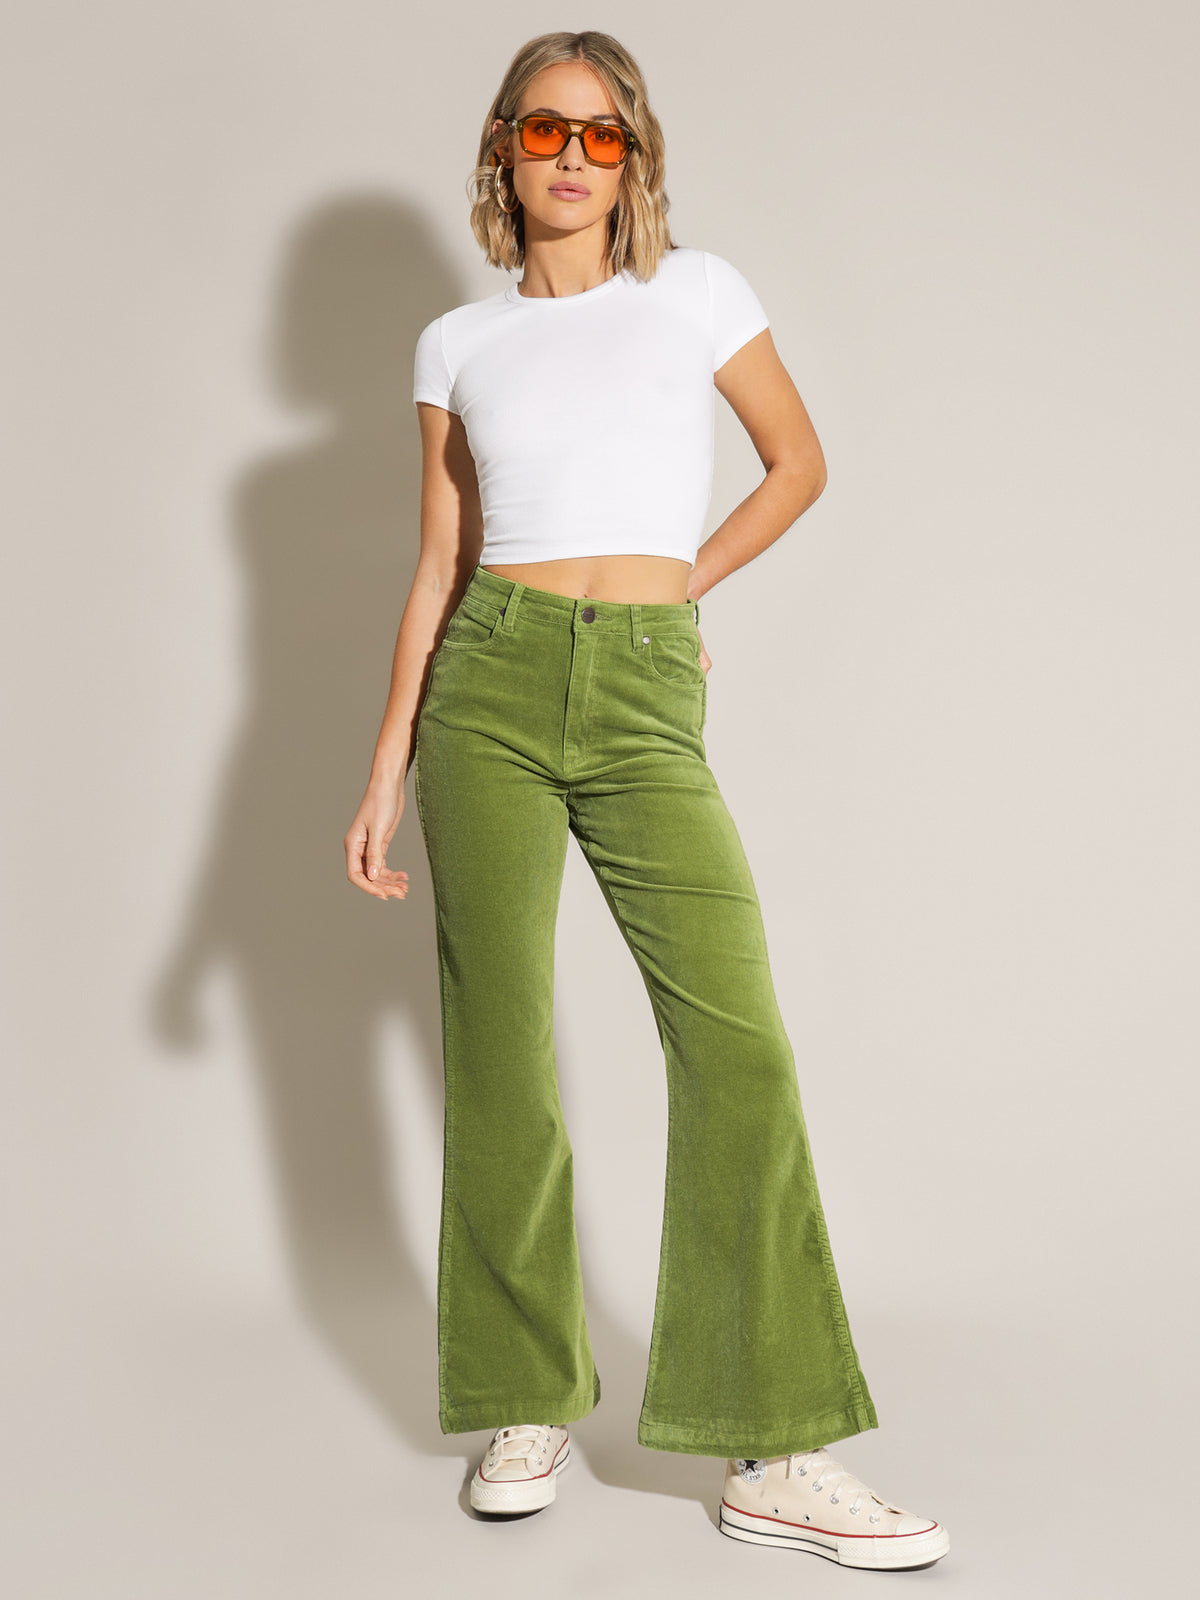 Lou Lou Bells in Lime Cord